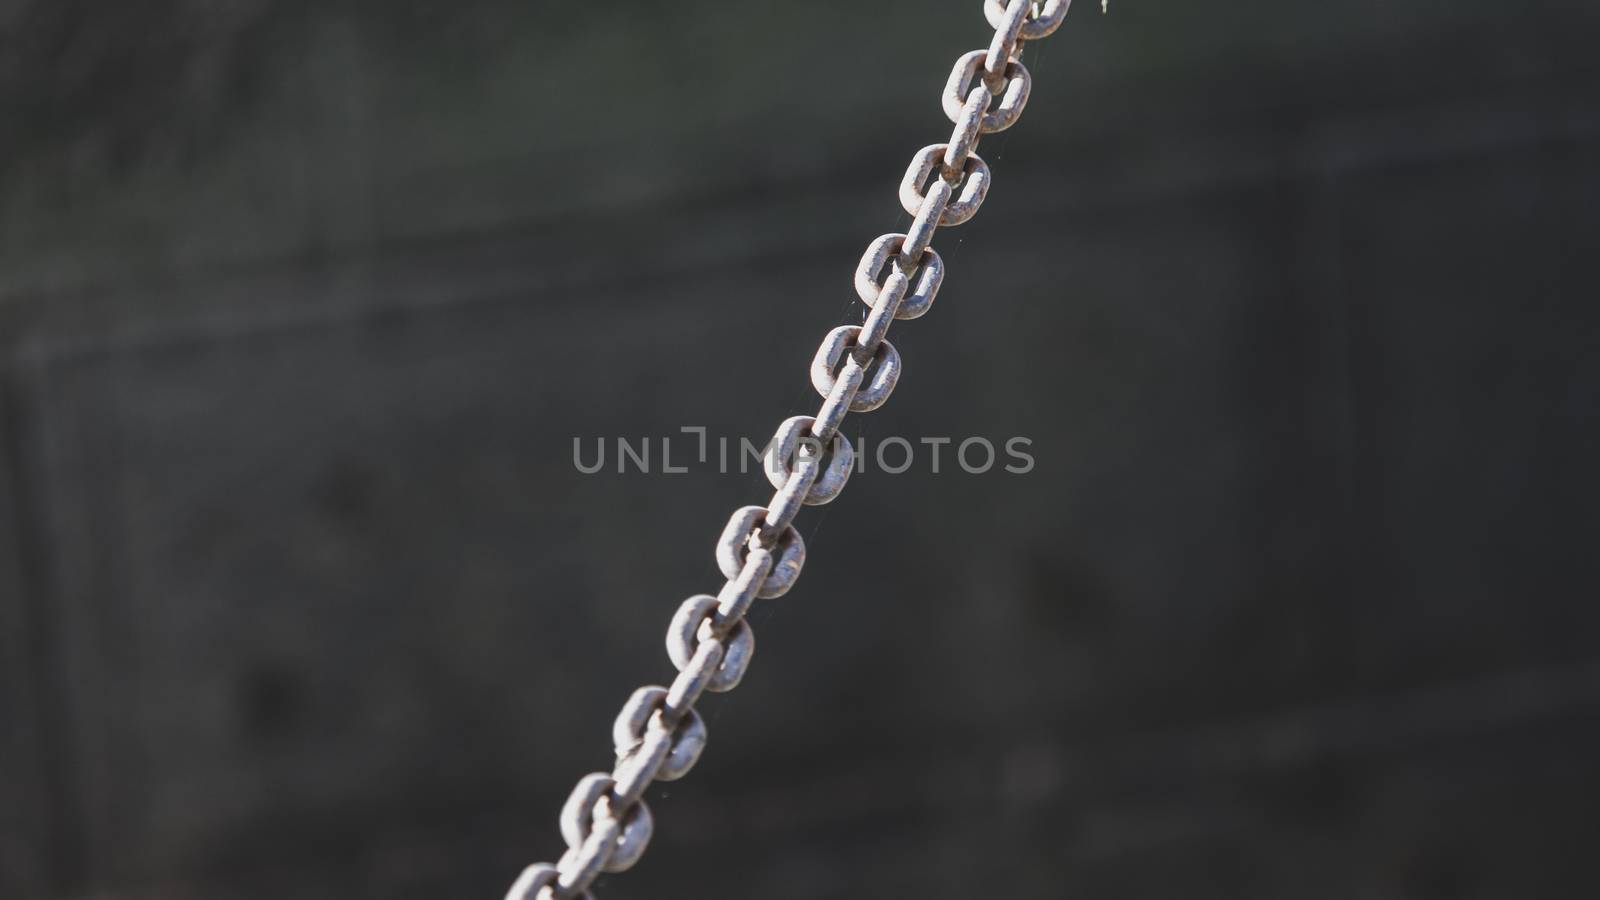 A metal chain made of steel is suspended across an open area, and viewed such that it runs diagonally across the center of the frame. Darkened gray stone bricks are seen out of focus behind it.